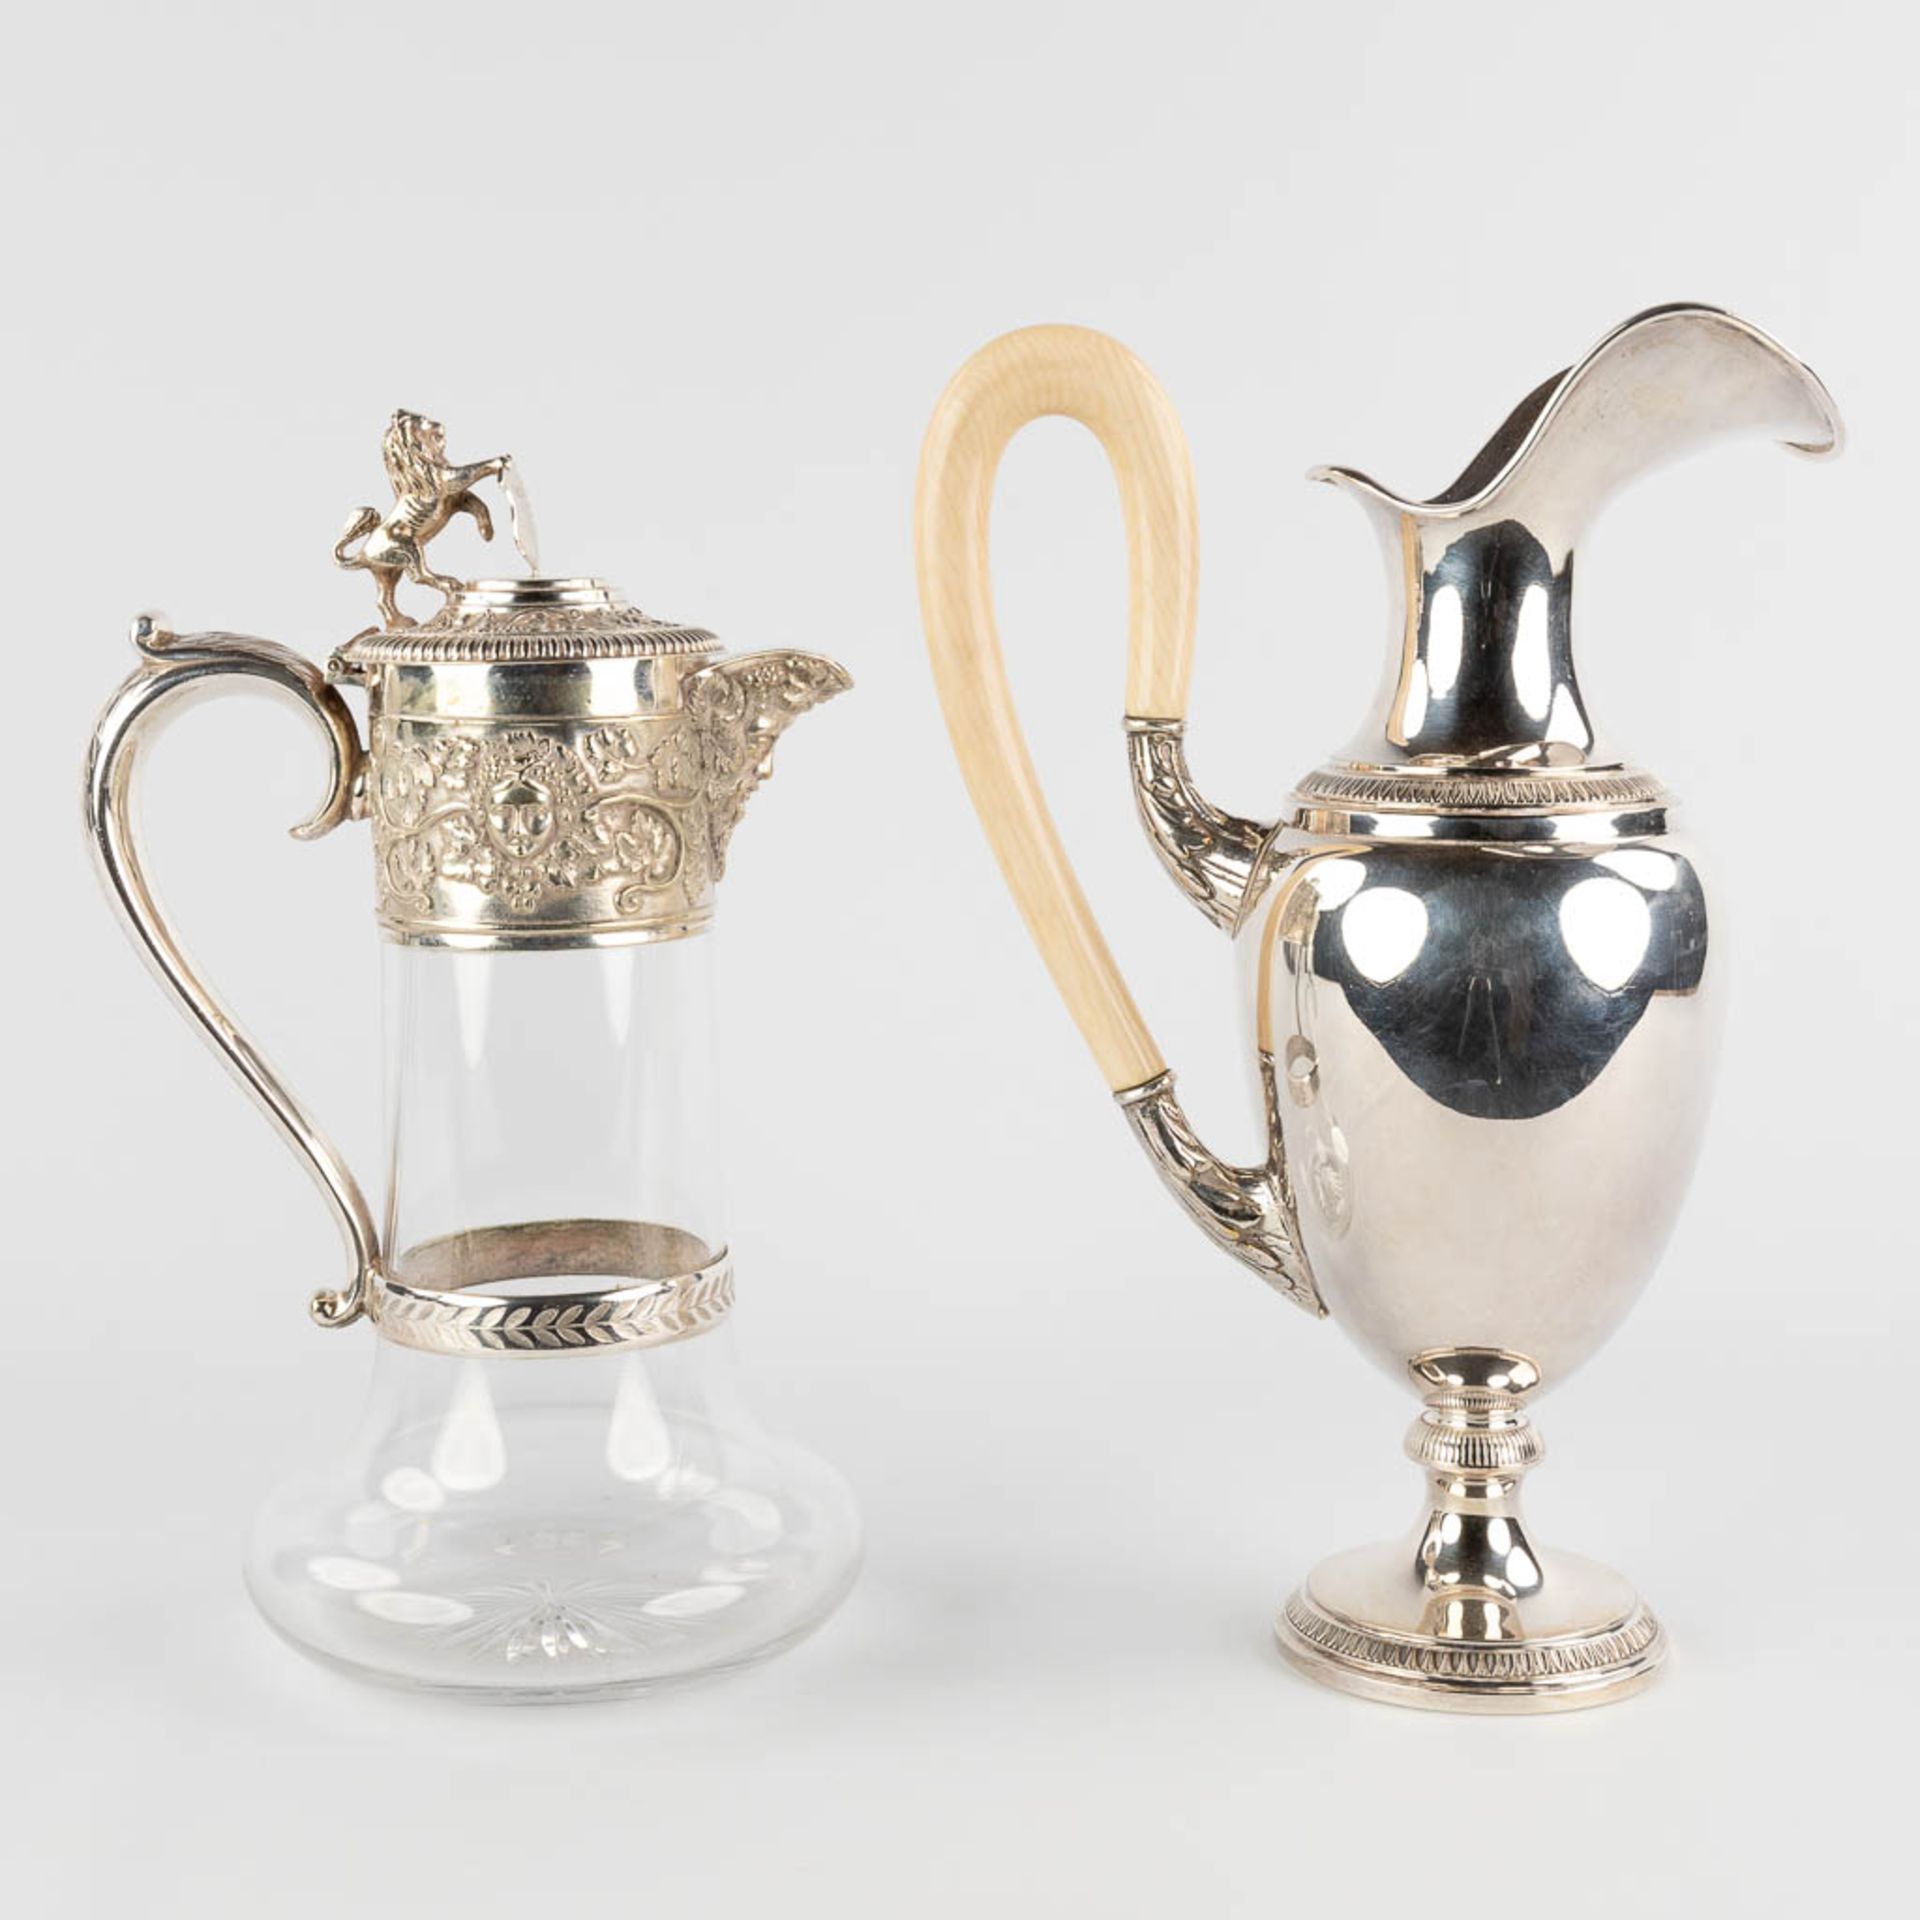 Two pitchers, cyrstal and silver-plated metal. (H:29 cm) - Image 3 of 14